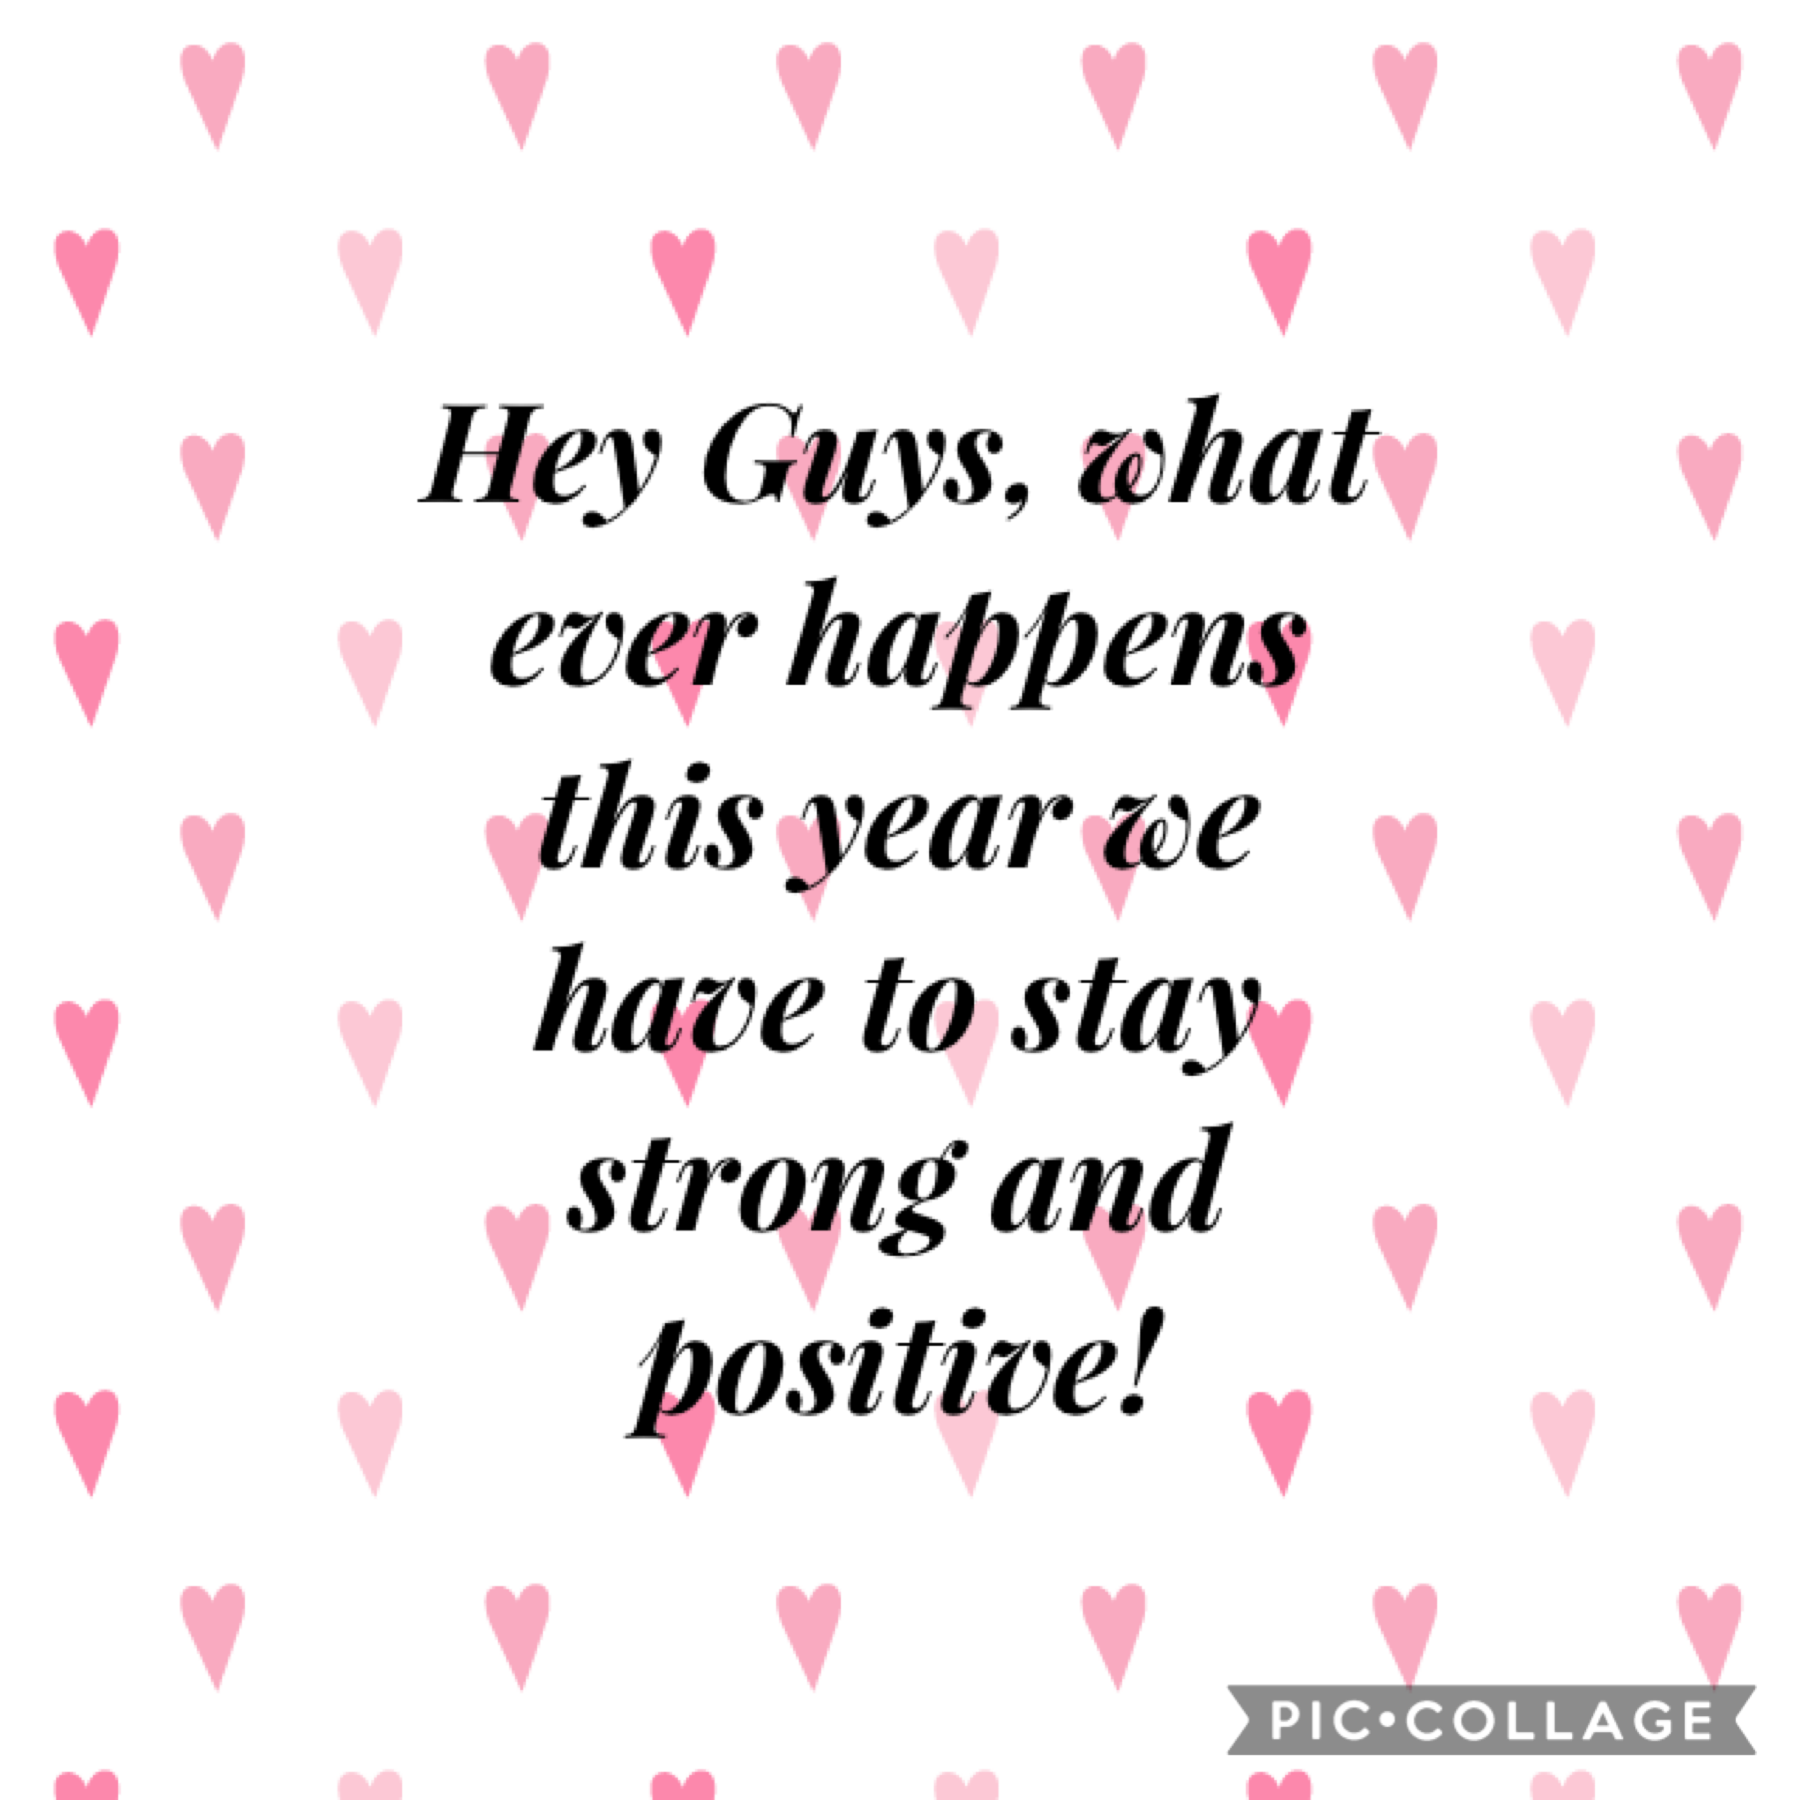 #strong and positive